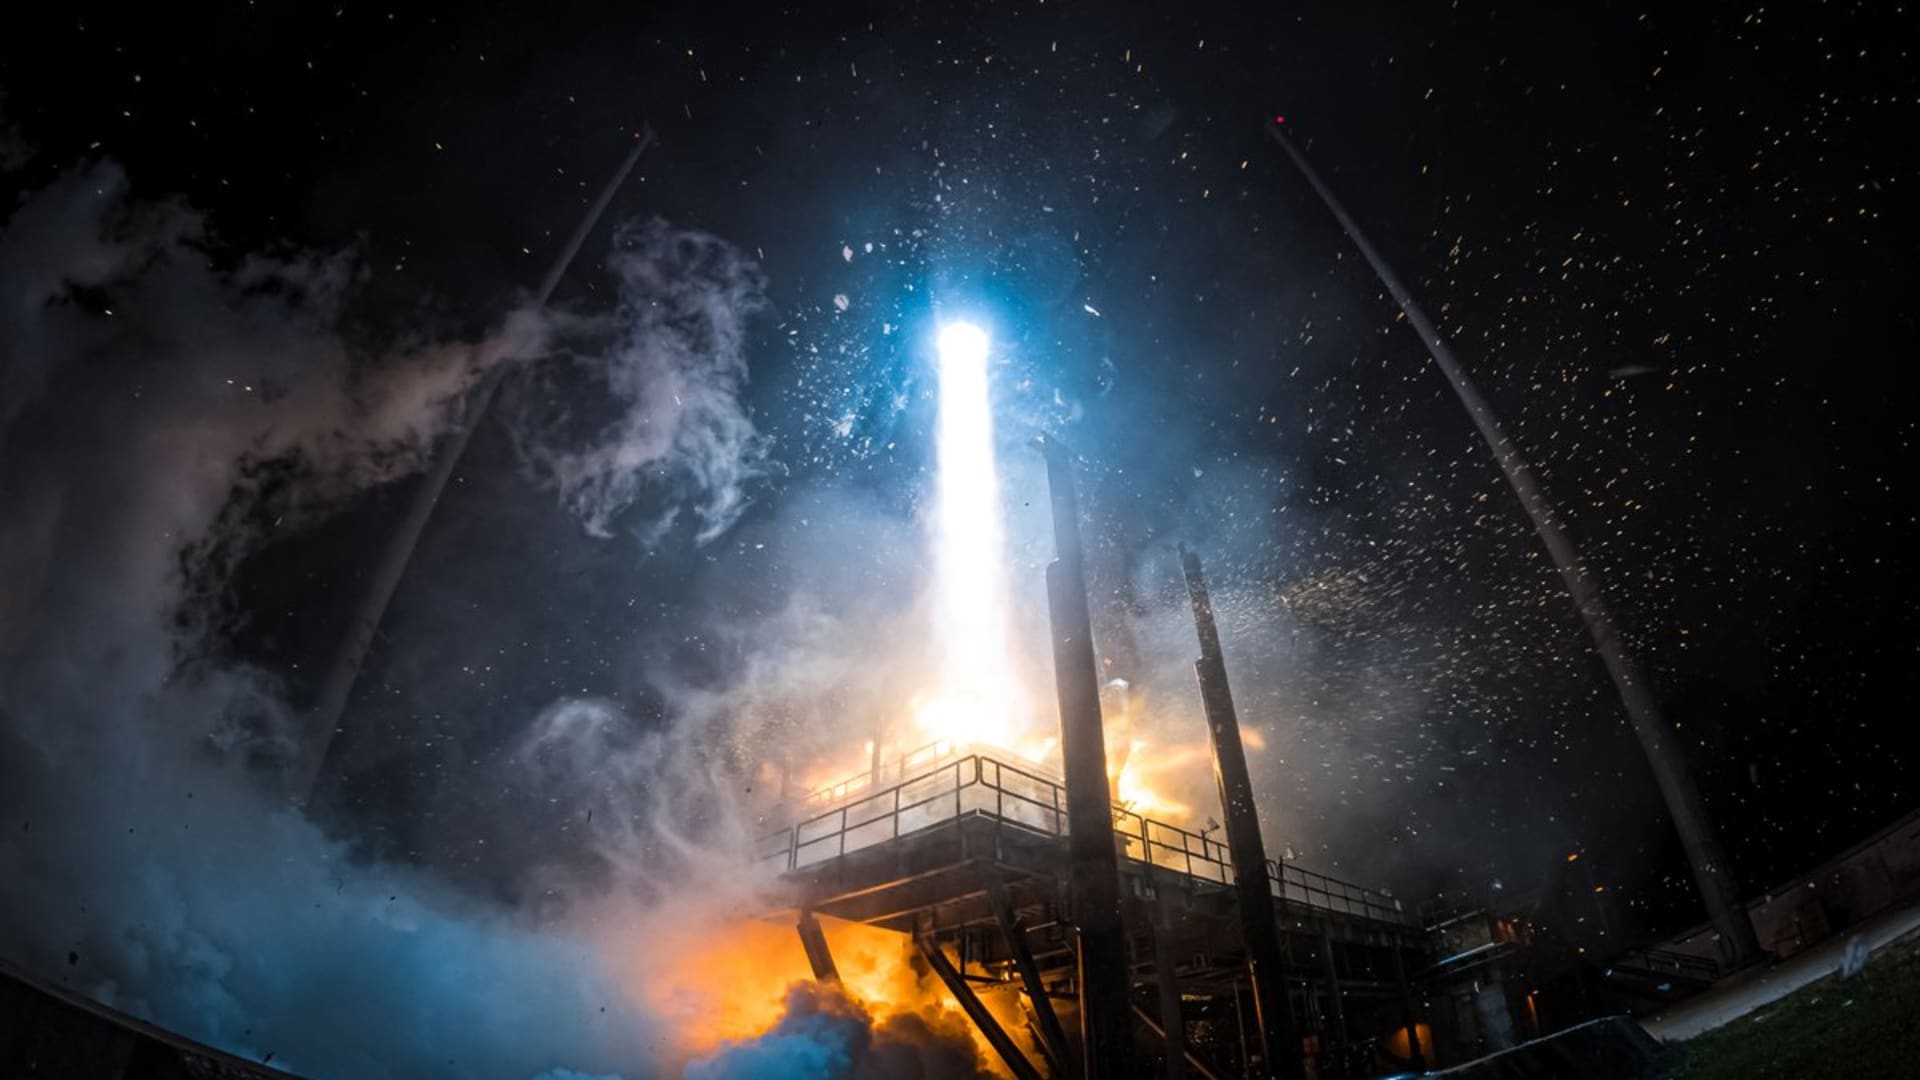 Investing in Space: Relativity CEO bets on bigger rockets, A.I. capabilities